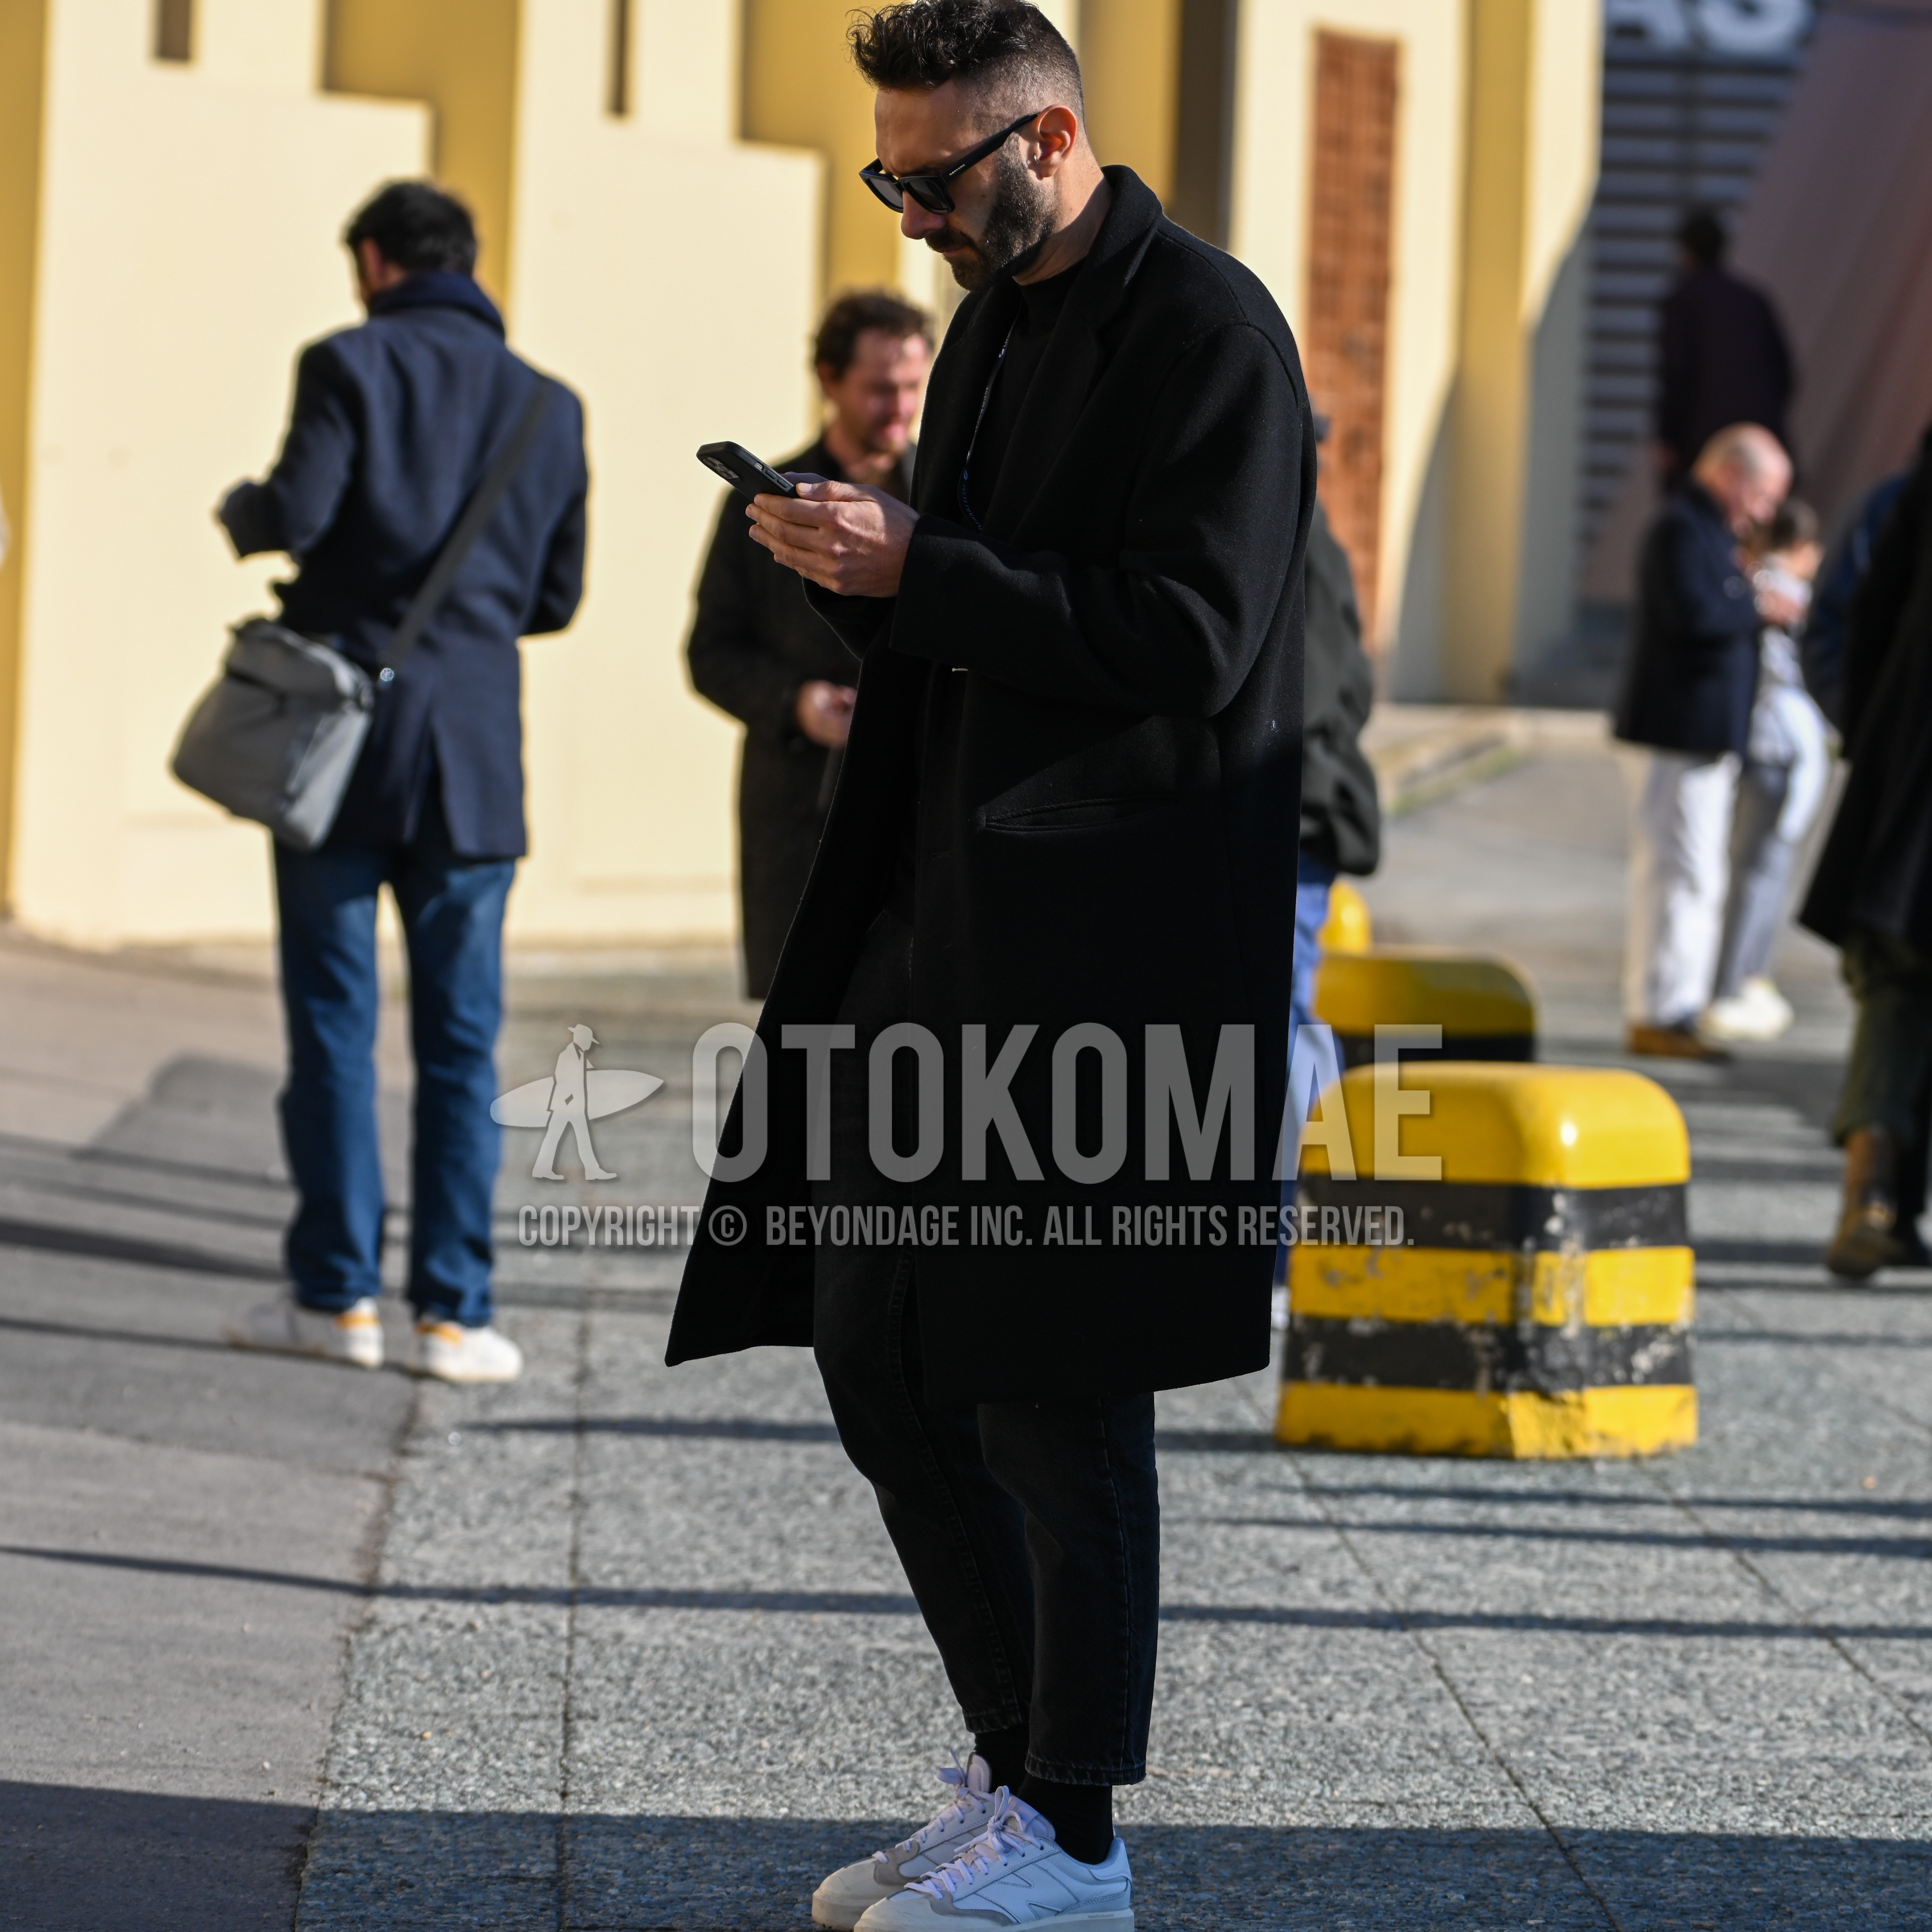 Men's autumn winter outfit with black plain sunglasses, black plain stenkarrer coat, black plain sweater, black plain ankle pants, black plain socks, white low-cut sneakers.